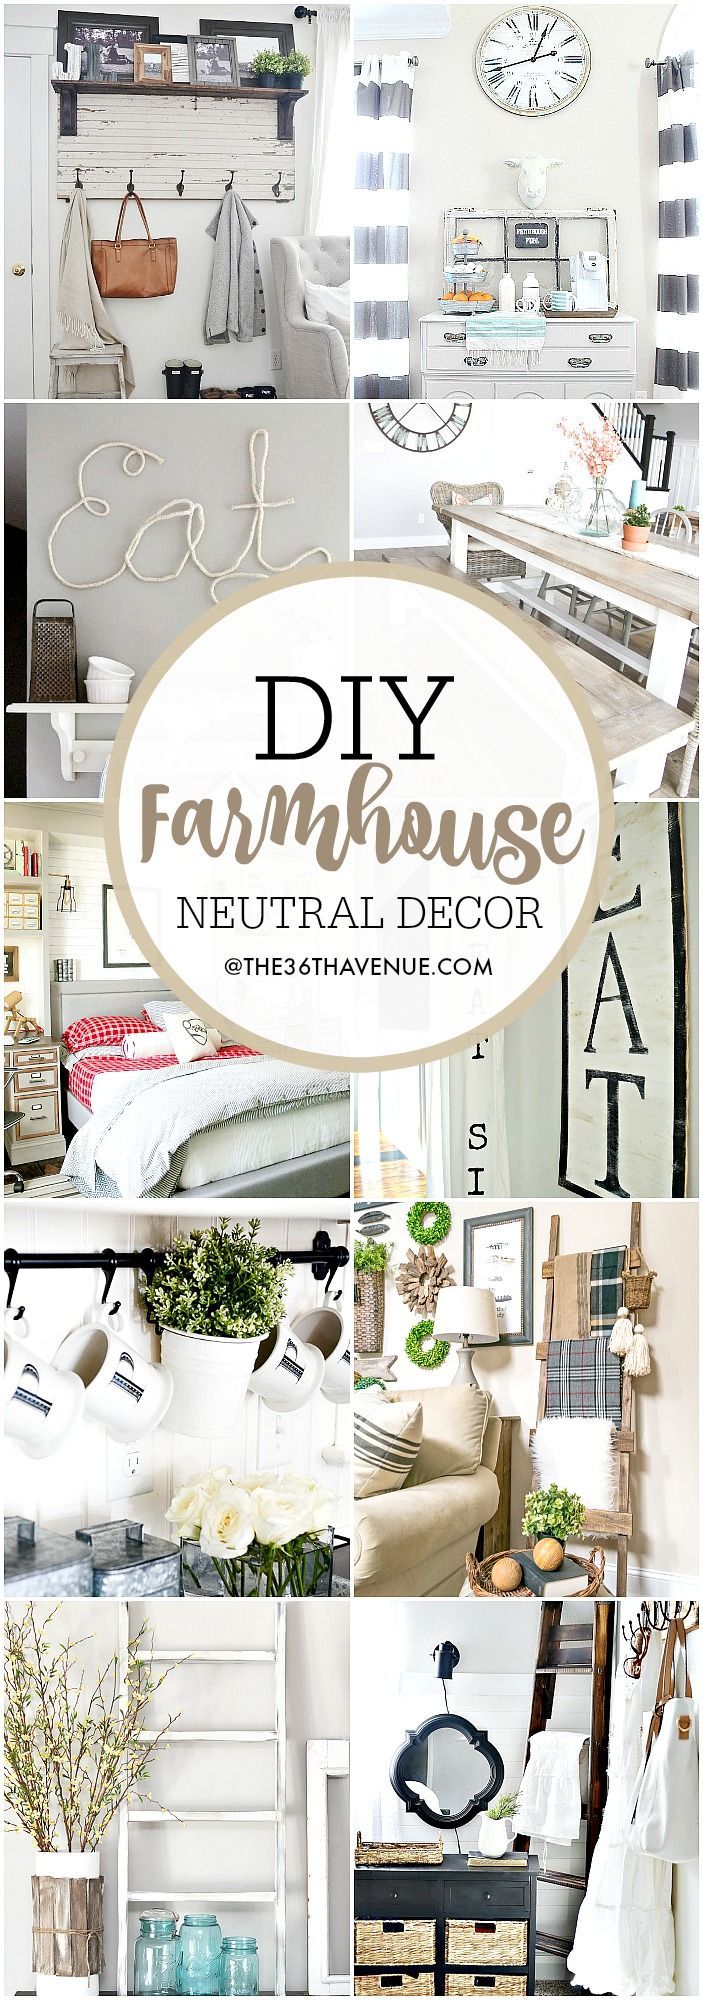 Farmhouse DIY Decor Ideas – Over 100 DIY Farmhouse Home Decor Ideas that are perfect to give your own home the charming and